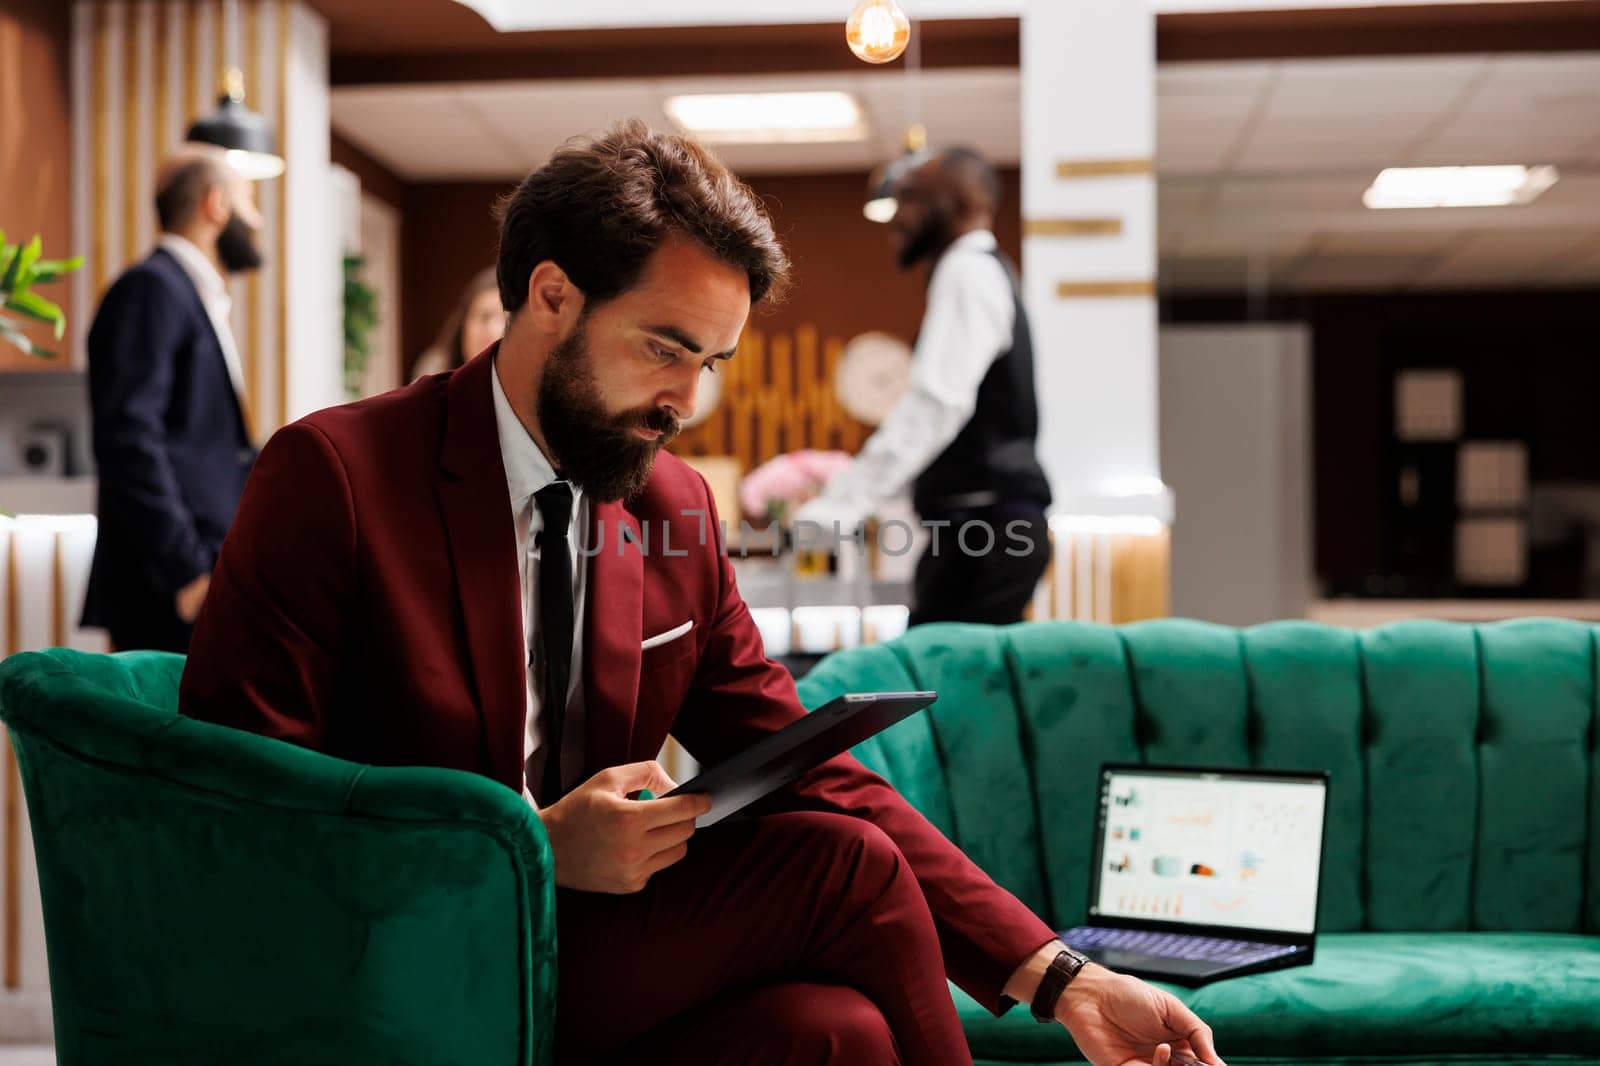 Businessman using tablet in hotel lobby, working on new ideas presentation for important upcoming meeting. Employee trying to create professional speech to impress executive board.